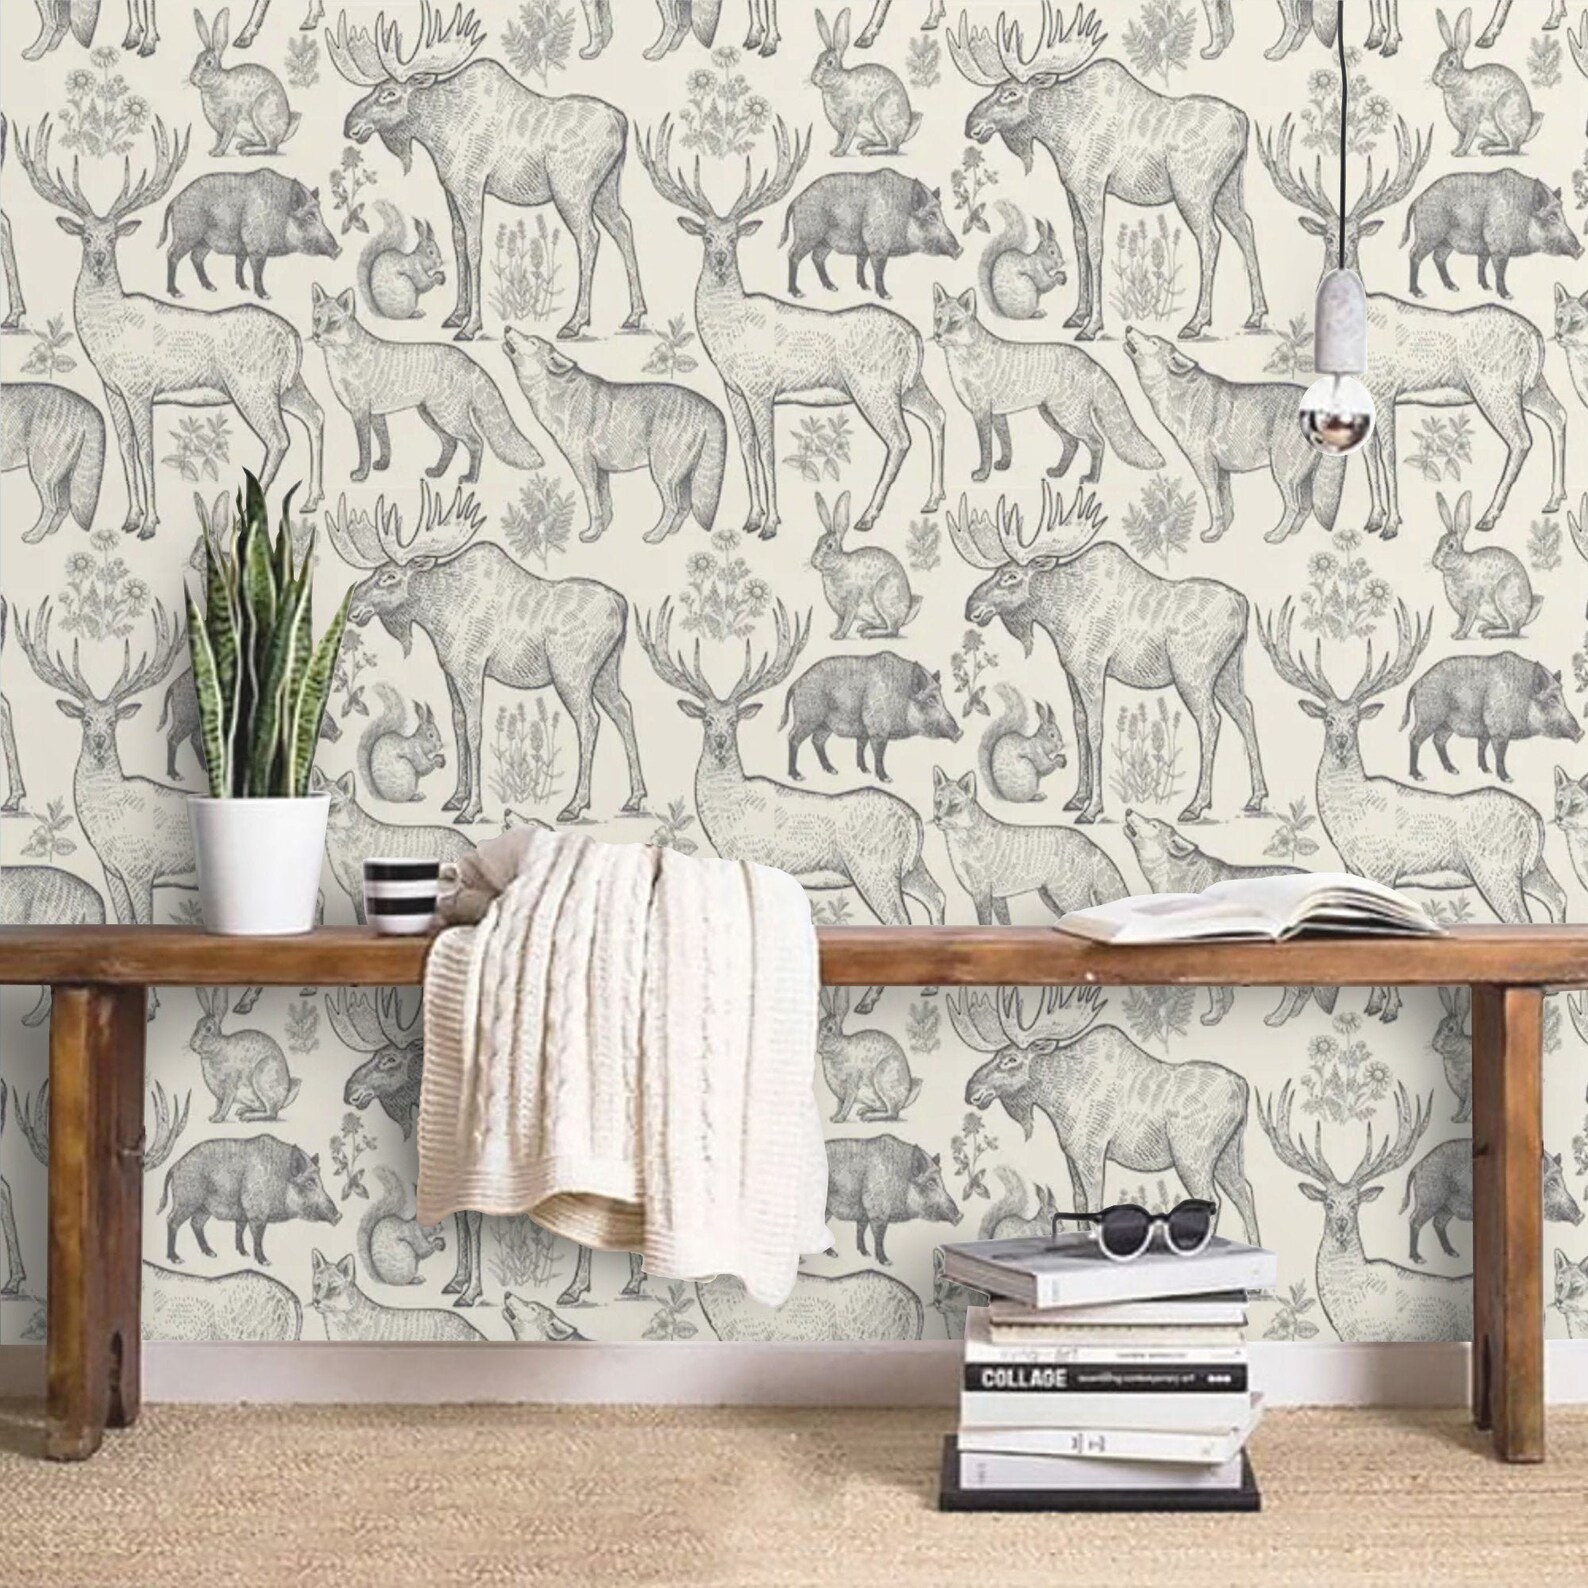 Forest Animals Wallpaper Peel and Stick Vintage Wallpaper | Etsy